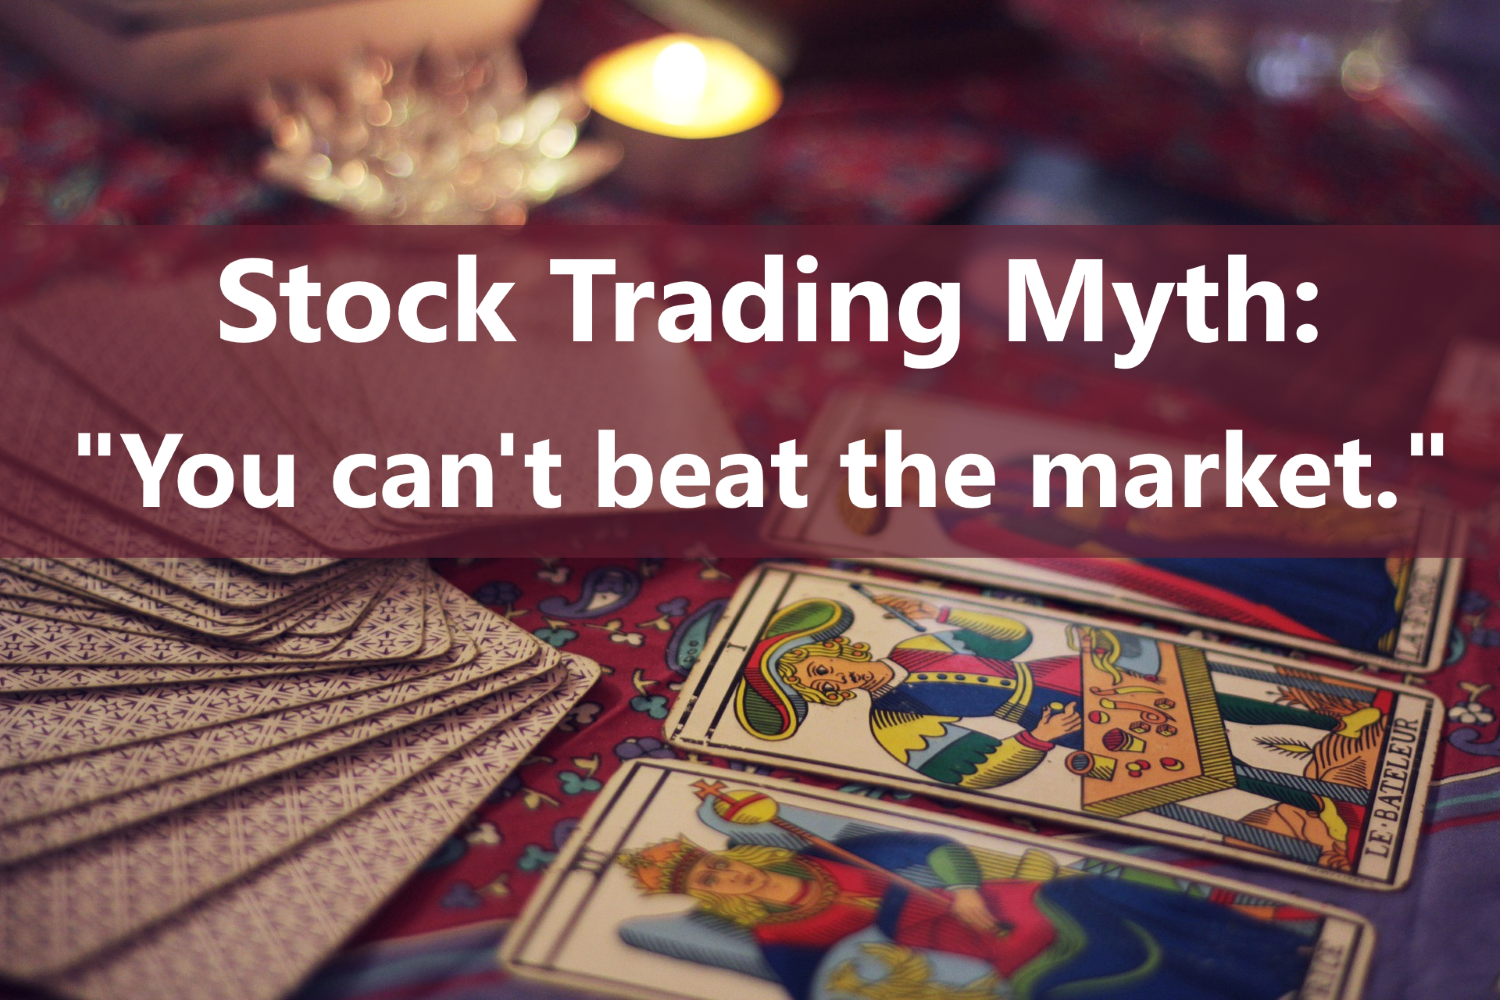 A common stock trading myth is "you can't beat the market."